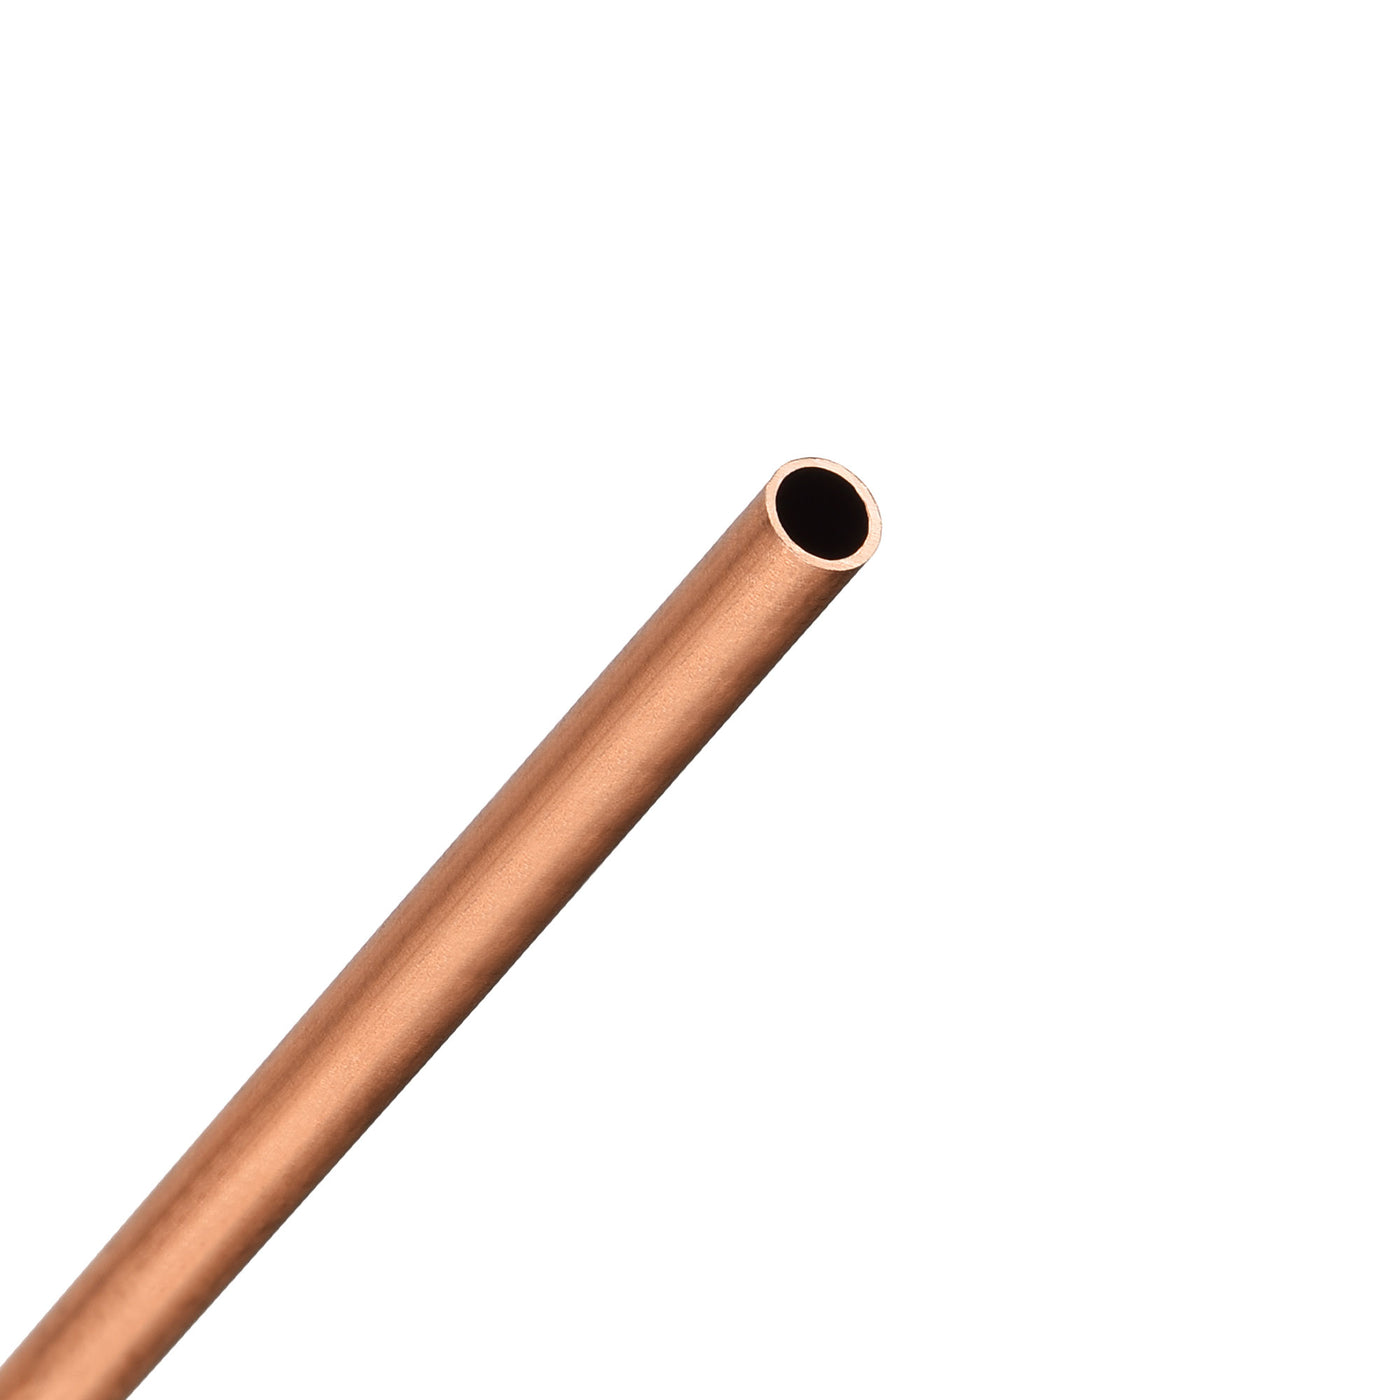 uxcell Uxcell Copper Tubing Seamless Straight Pipe Tubes